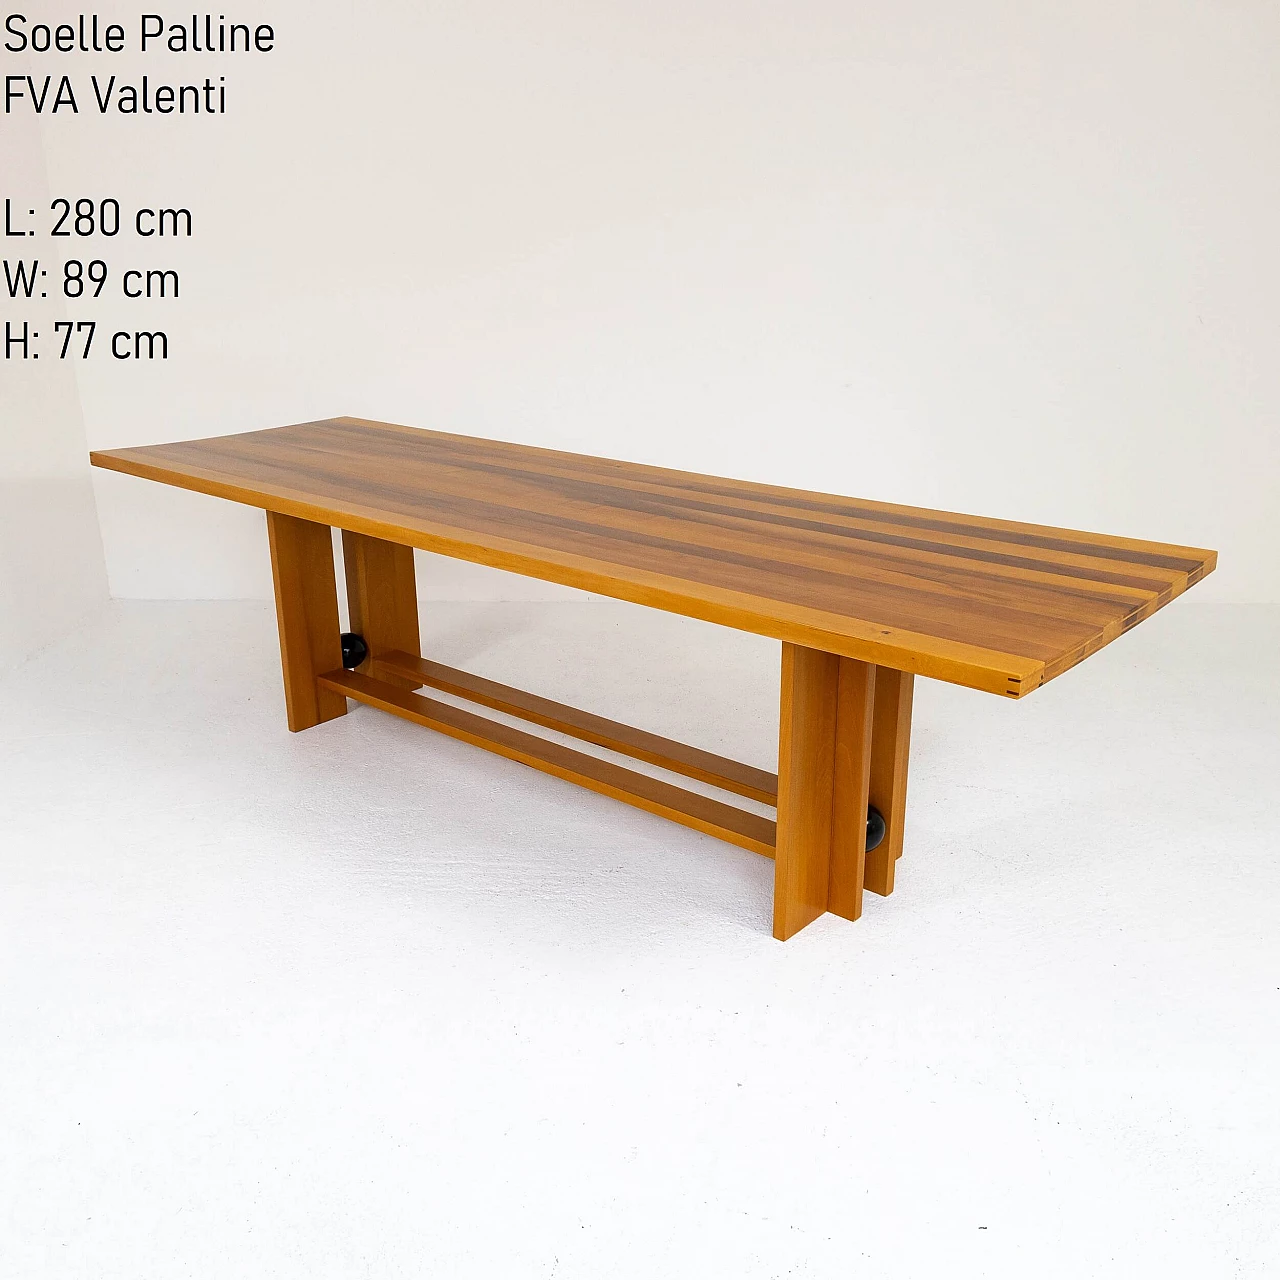 Wooden table by Soelle Palline for FVA Valenti, 1990s 11